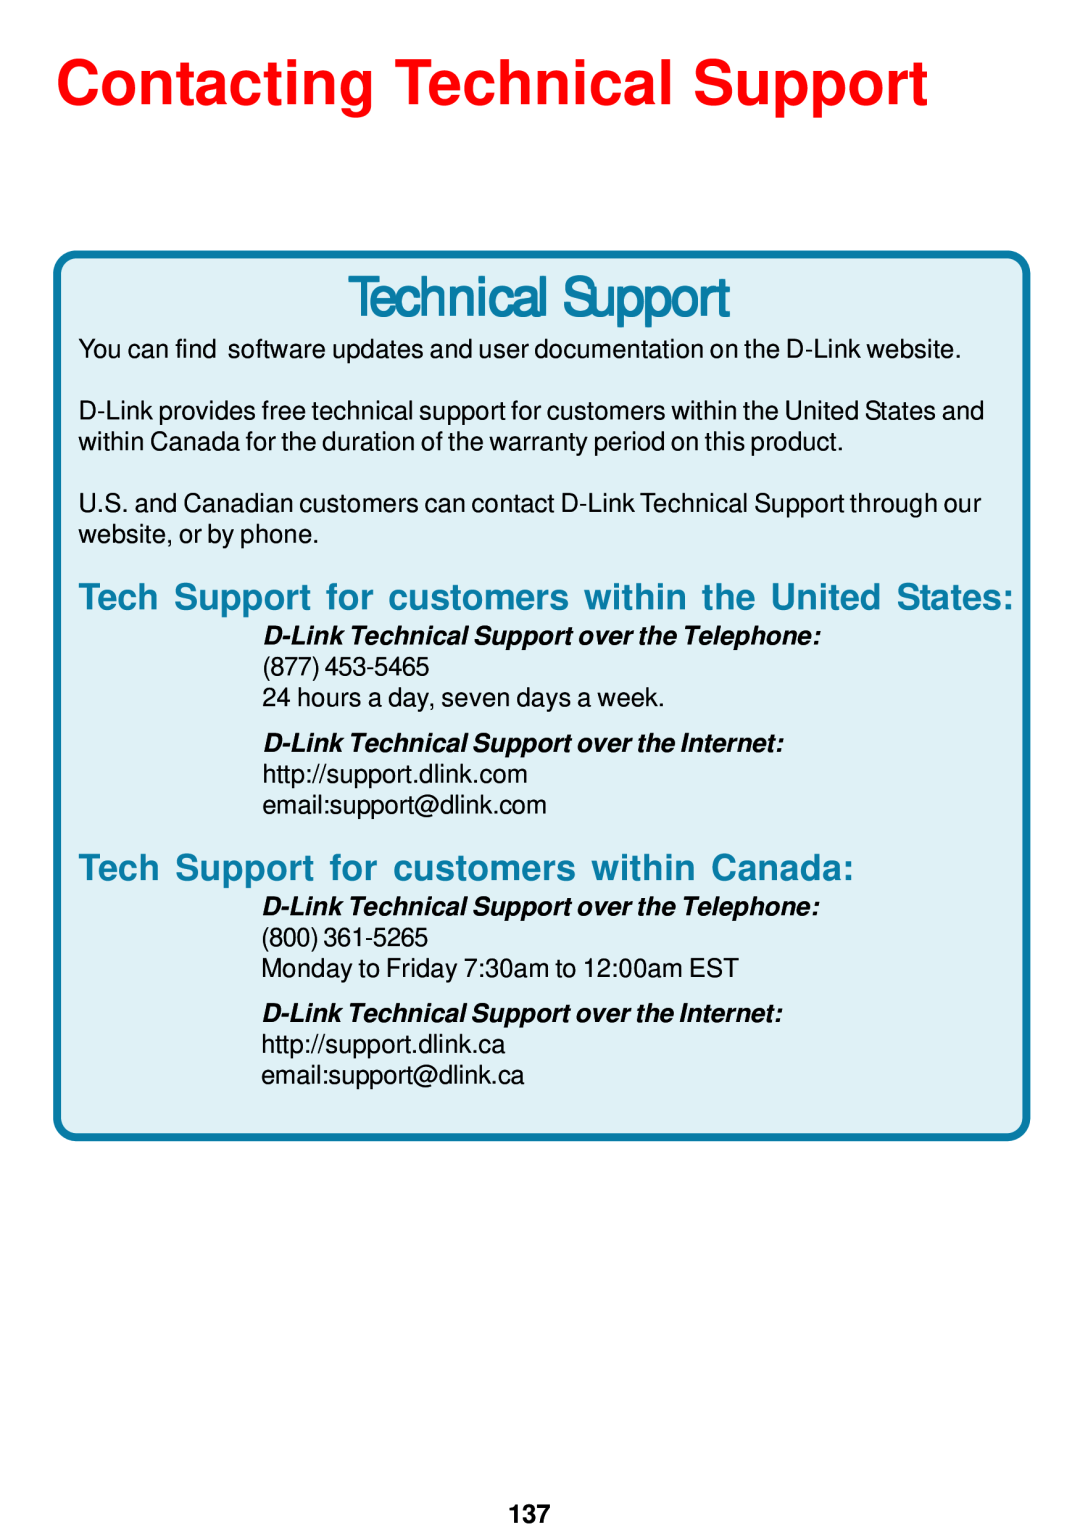 D-Link DCS-5300 manual Contacting Technical Support, Tech Support for customers within the United States 